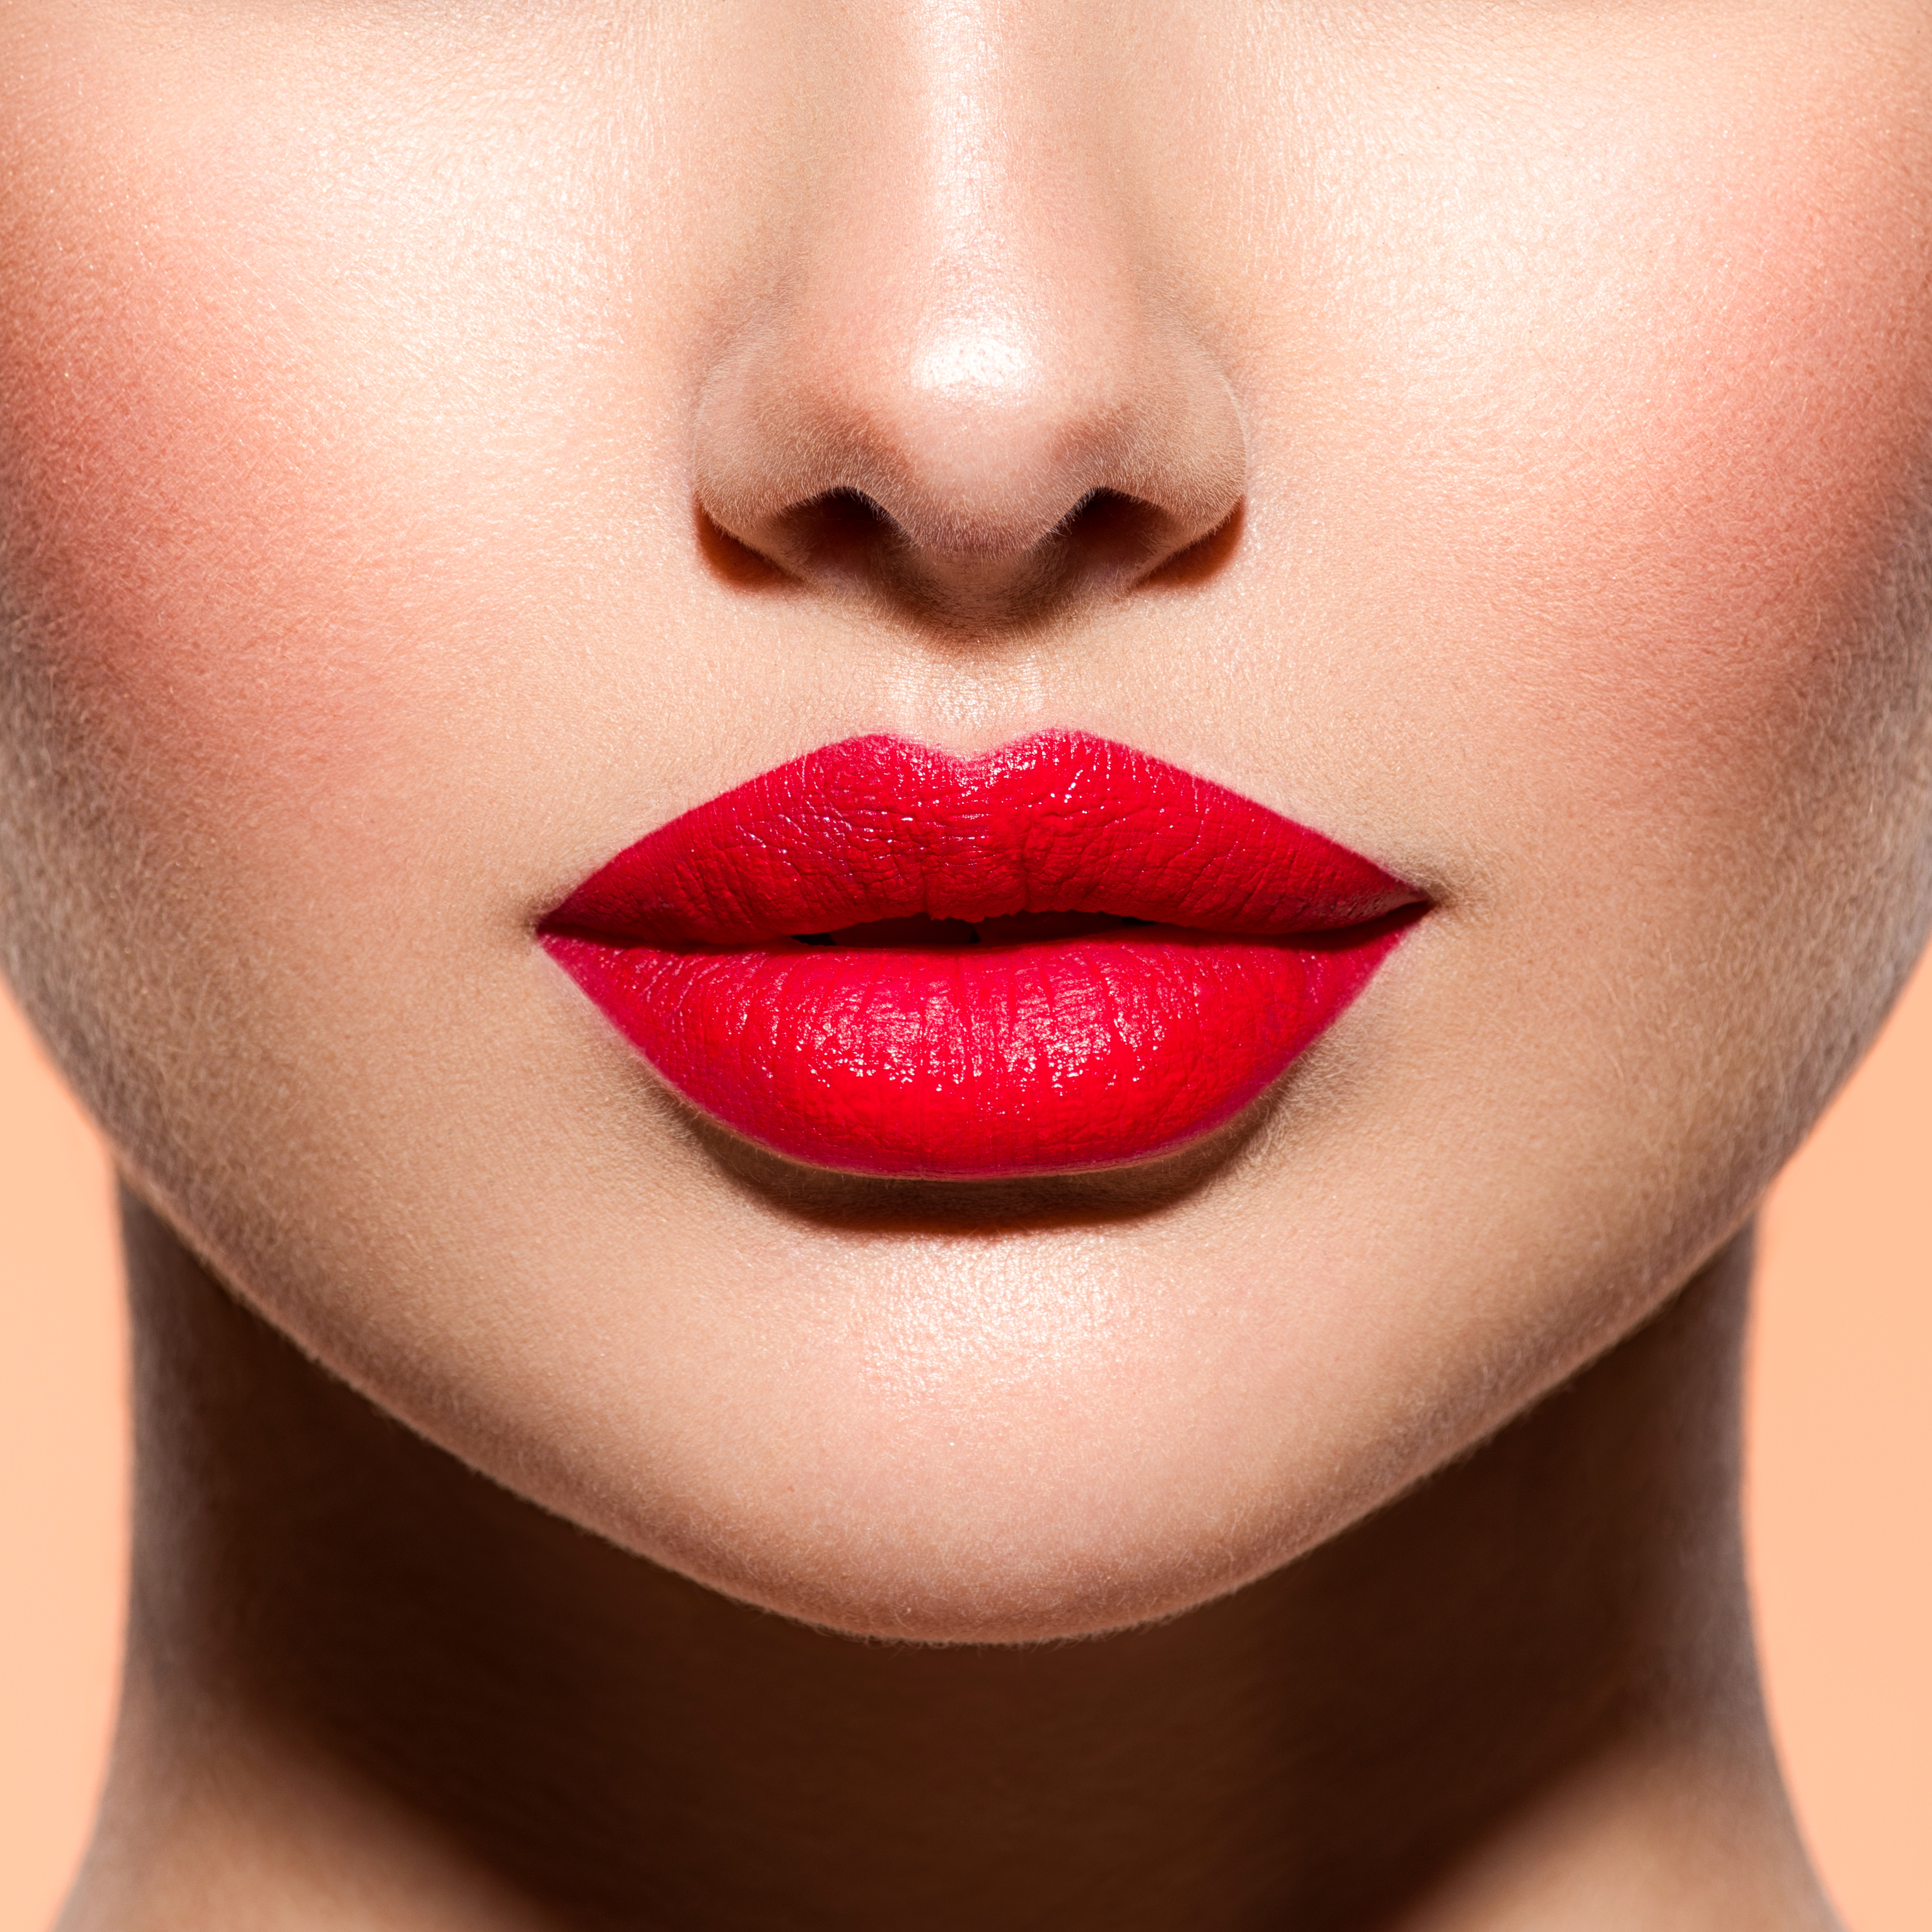 Lip Tattoos: The Newest Trend for Permanent Makeup